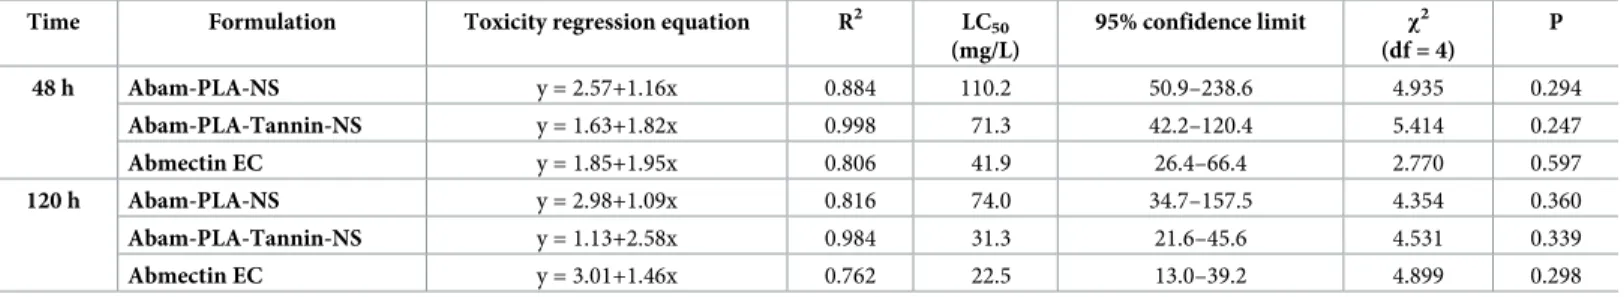 Table 4. Oral exposure for three abamectin formulations on lady beetle larvae.